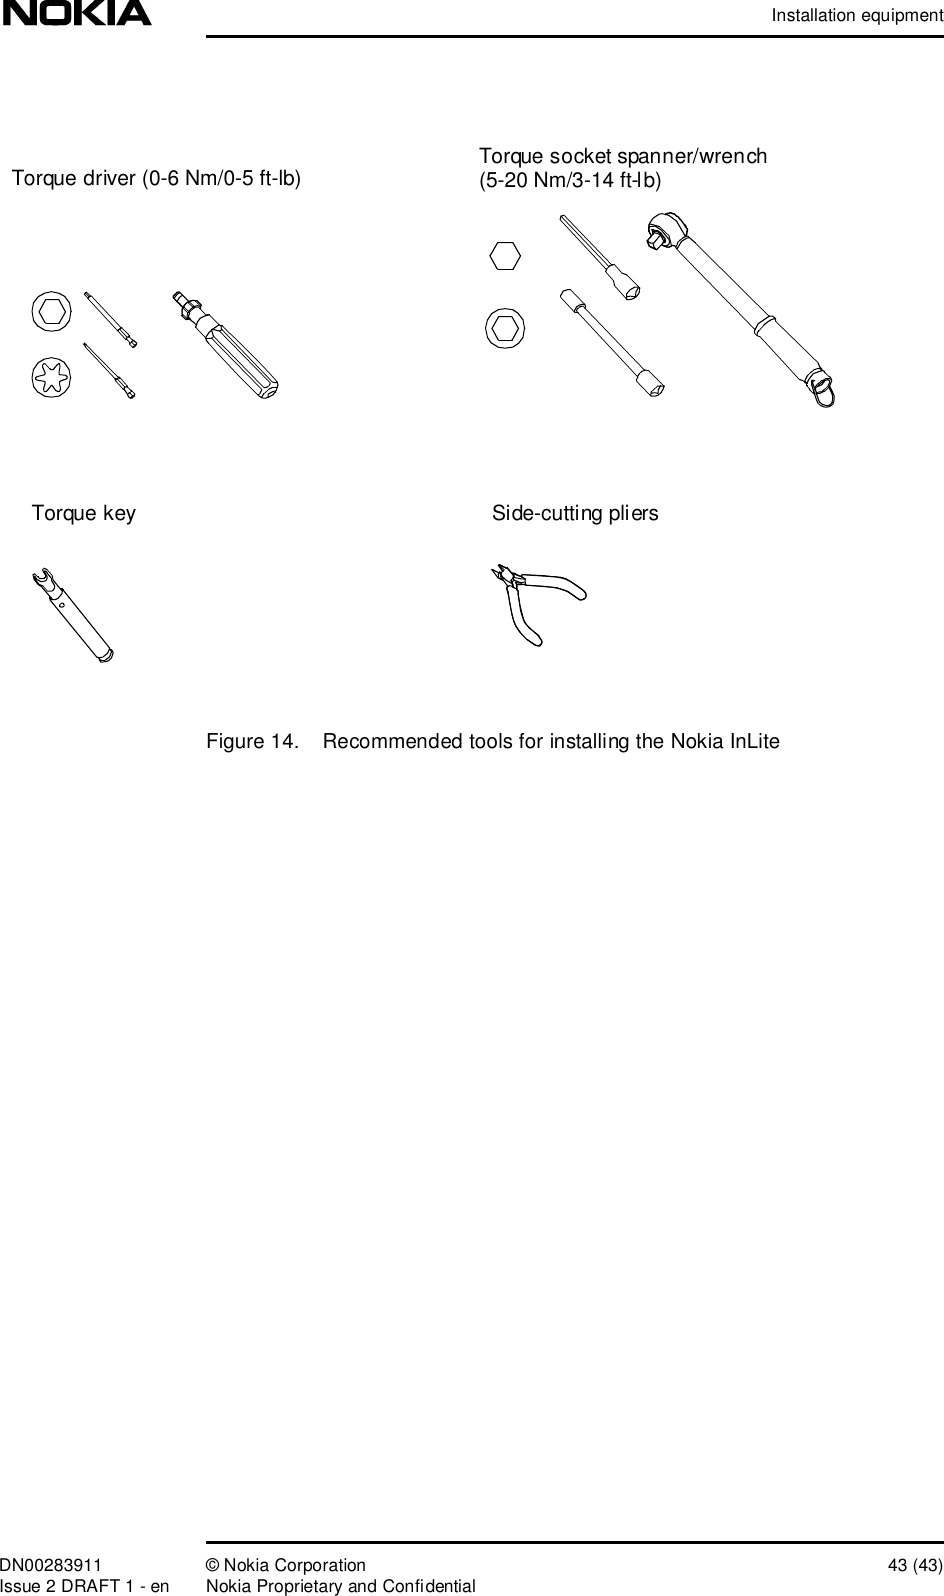 Installation equipmentDN00283911 © Nokia Corporation 43 (43)Issue 2 DRAFT 1 - en Nokia Proprietary and ConfidentialFigure 14.  Recommended tools for installing the Nokia InLiteSide-cutting pliersTorque socket spanner/wrench (5-20 Nm/3-14 ft-lb)Torque keyTorque driver (0-6 Nm/0-5 ft-lb) 